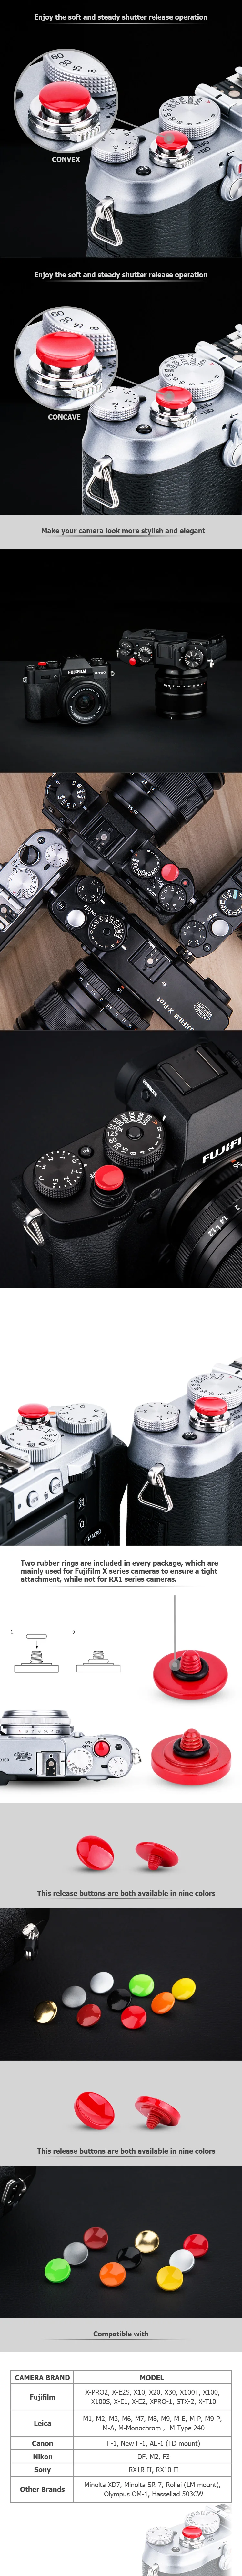 Jjc New Products Srb B10dgd Brass Soft Shutter Release Button For Canon F 1 New F 1 Ae 1 Fd Mount Nik Df M2 F3 Etc Buy Shutter Release Button Camera Soft Button For Canon F 1 New F 1 Ae 1 Fd Mount Soft Shutter Release Button